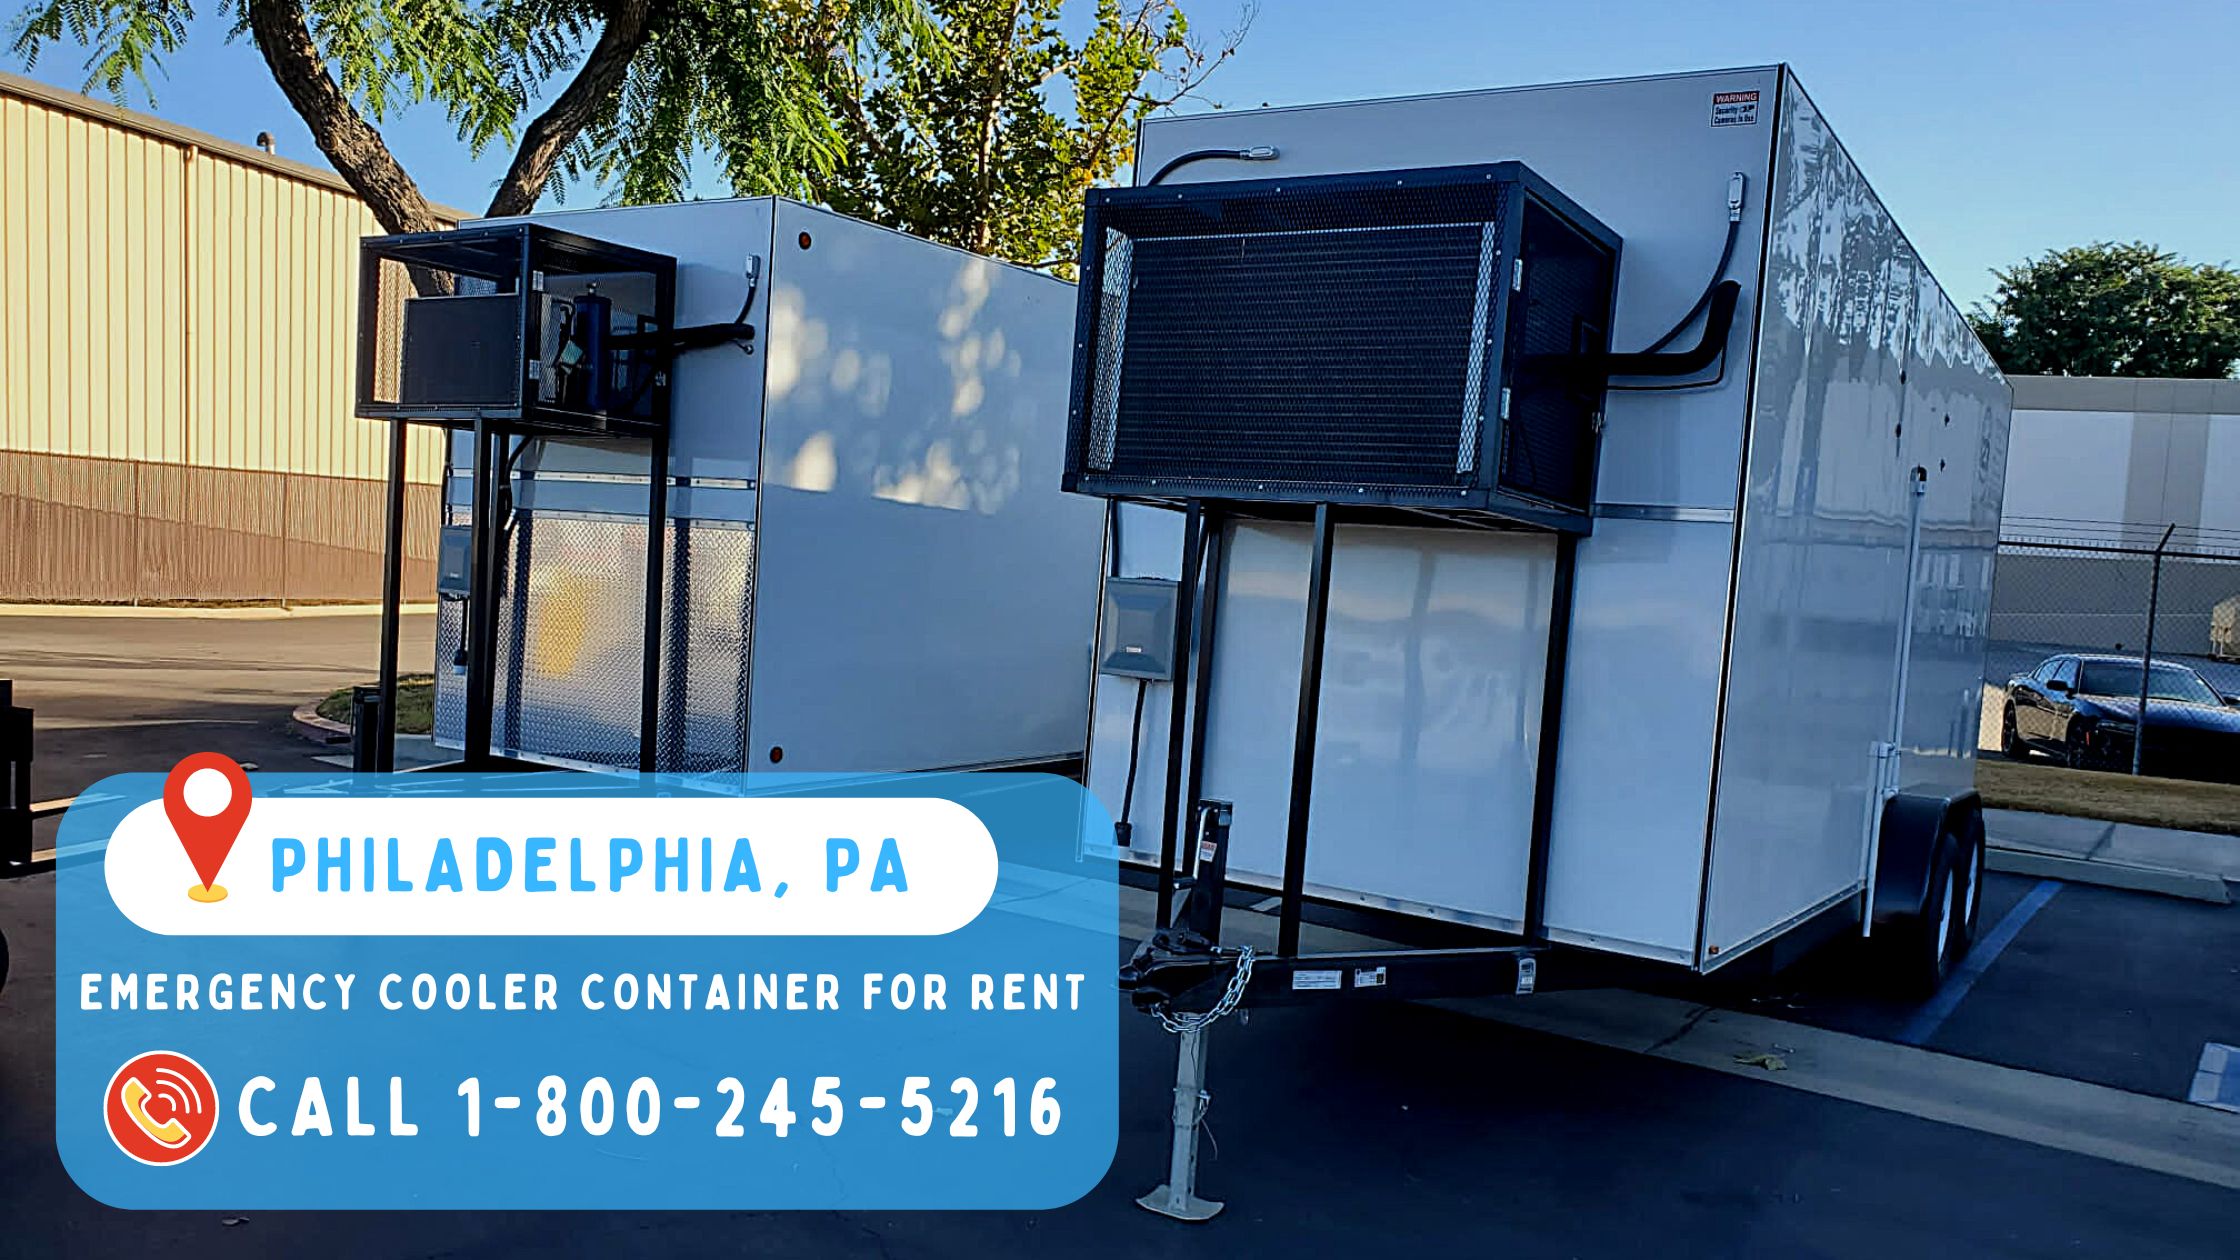 Emergency Cooler Container for Rent in Philadelphia